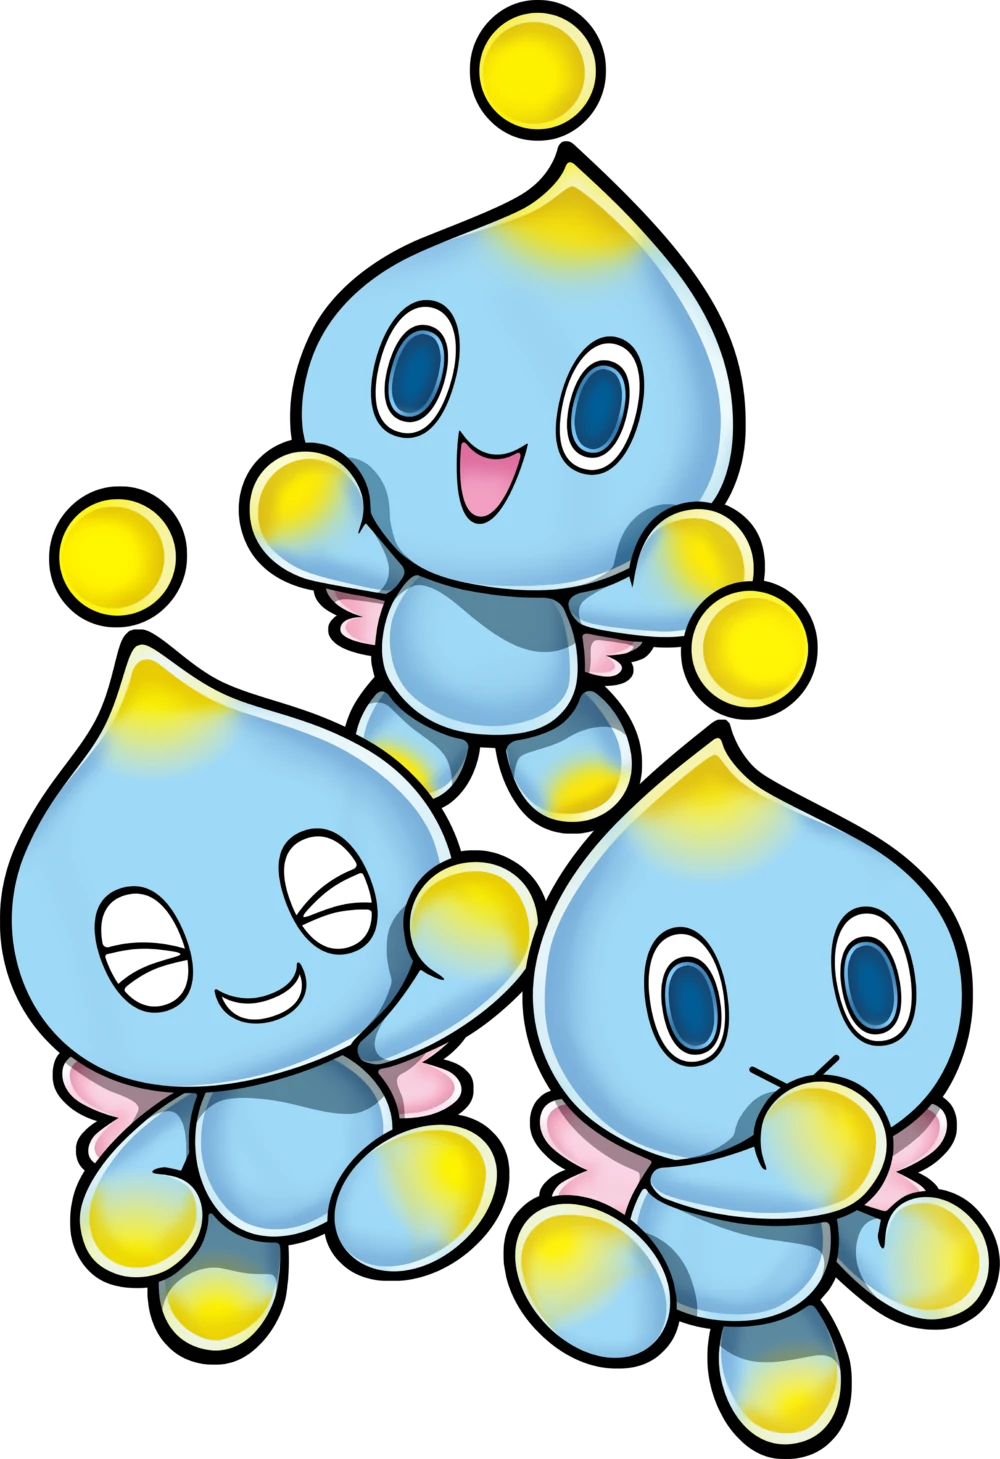 I just love drawing Chao. What's your favorite Chao evolution